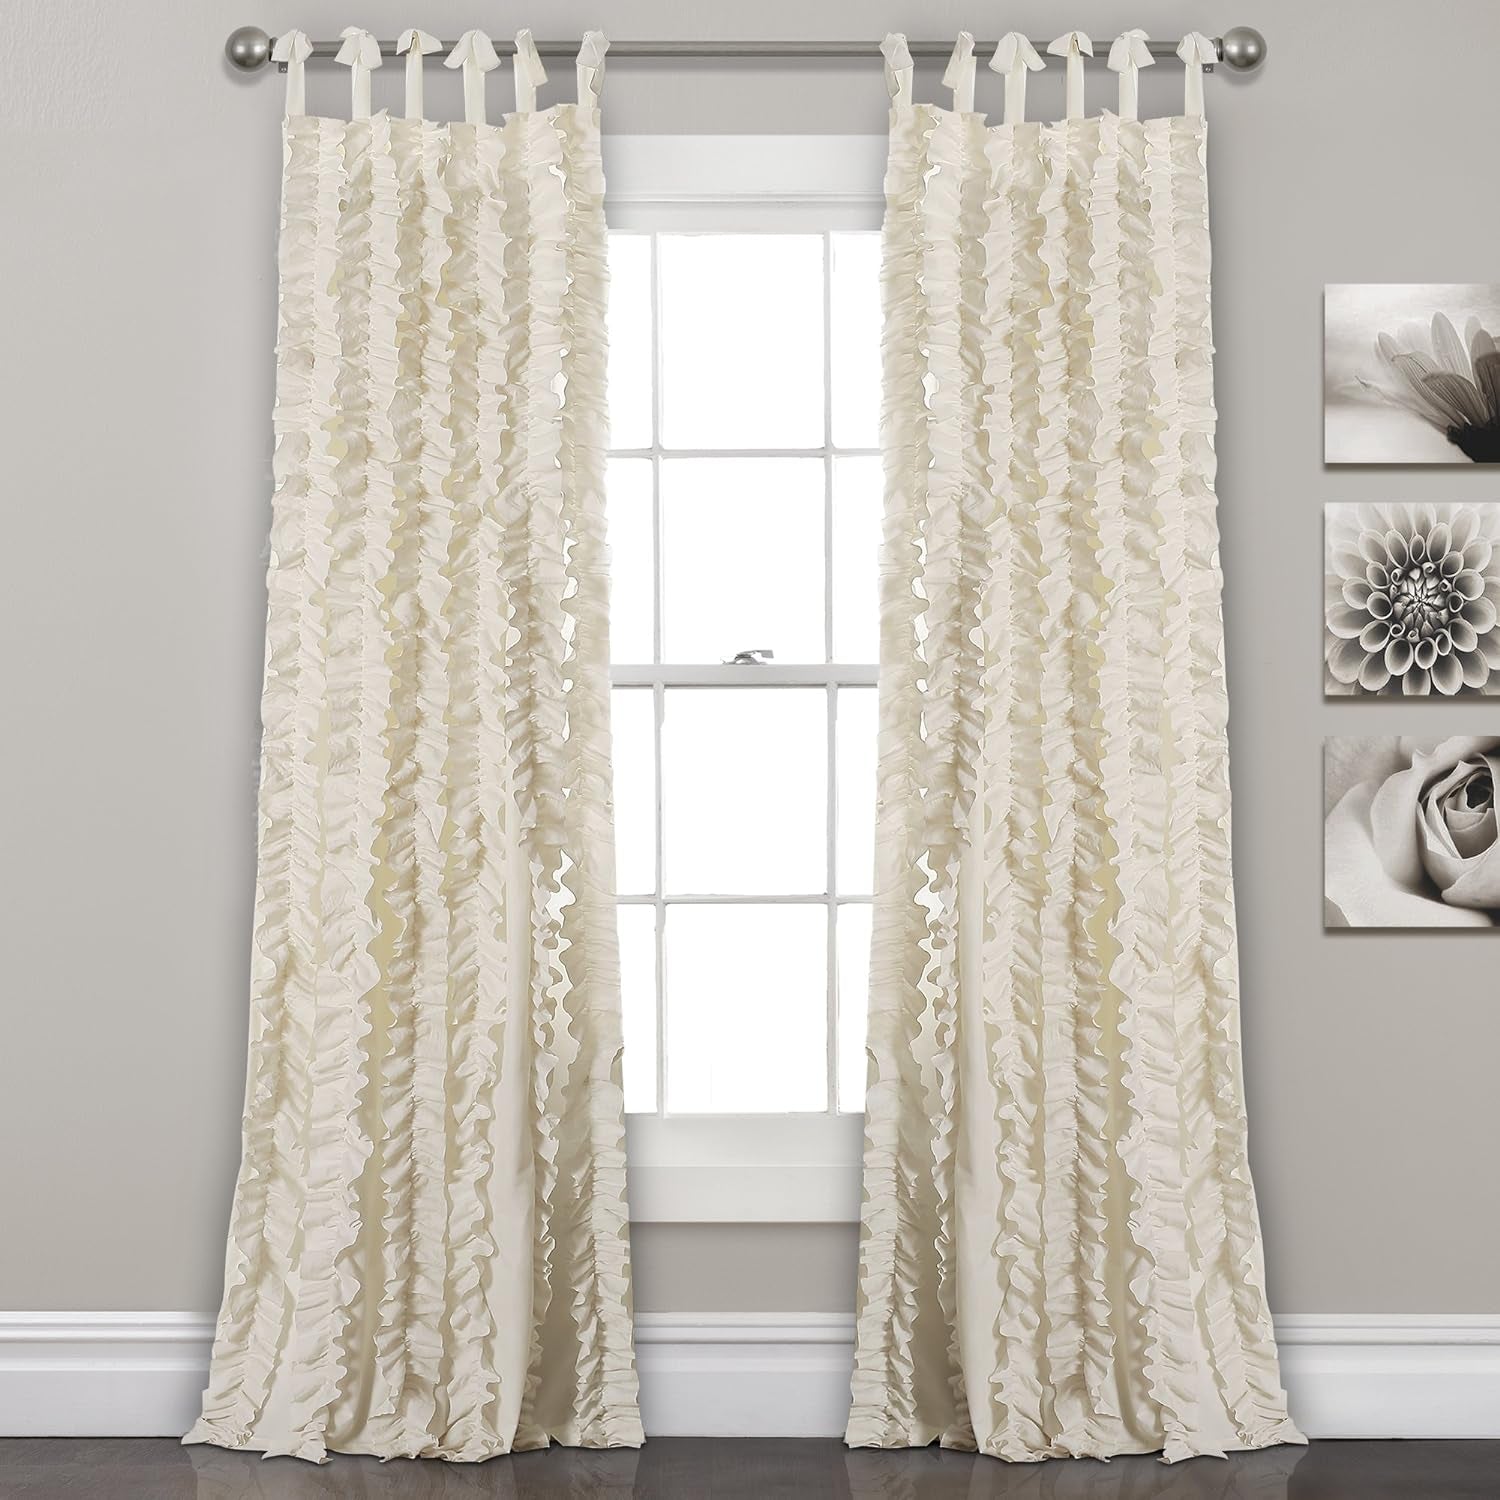 , Ivory Sophia Ruffle Curtain | Textured Window Panel Set for Living, Dining Room, Bedroom (Pair), 40" W X 84" L